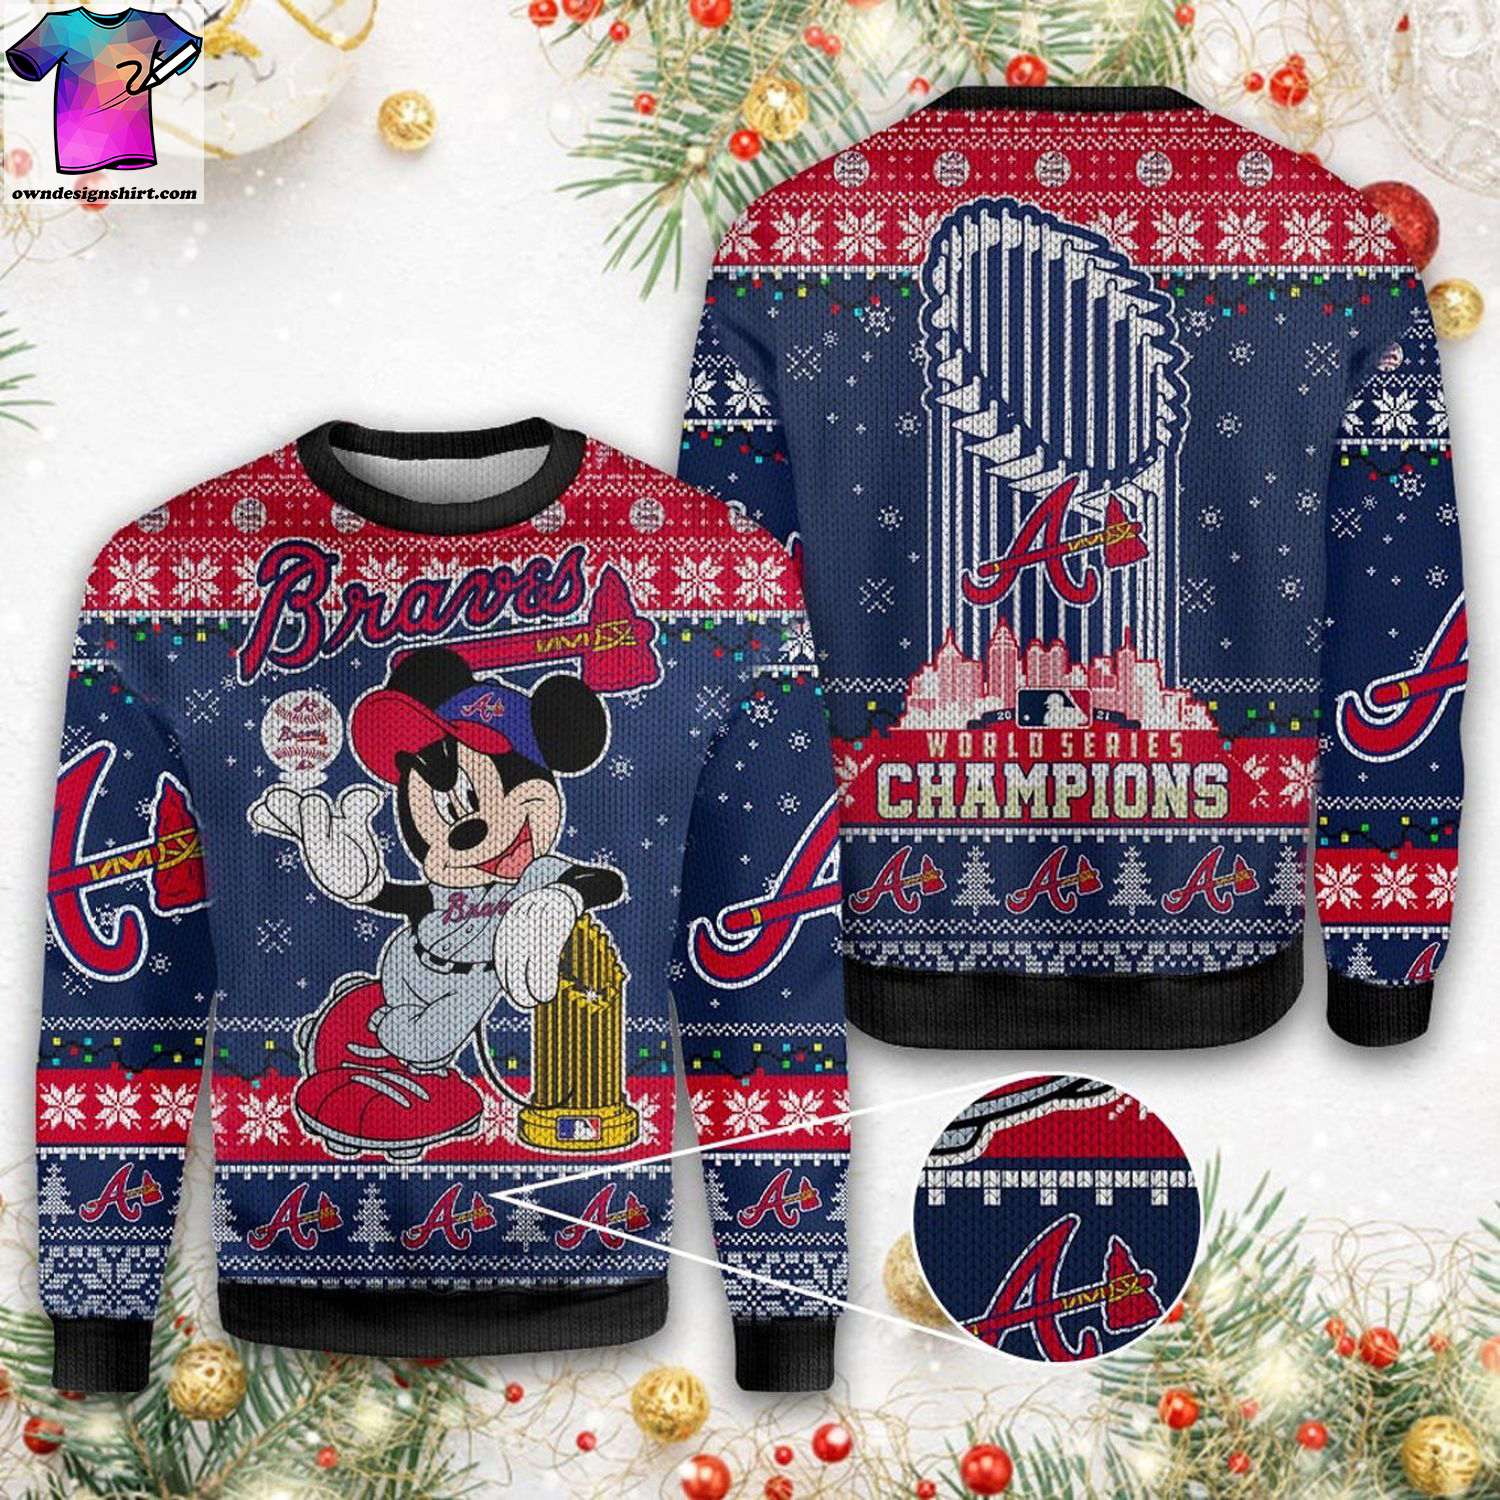 Atlanta braves world series champions mickey mouse ugly christmas sweater - Copy (2)